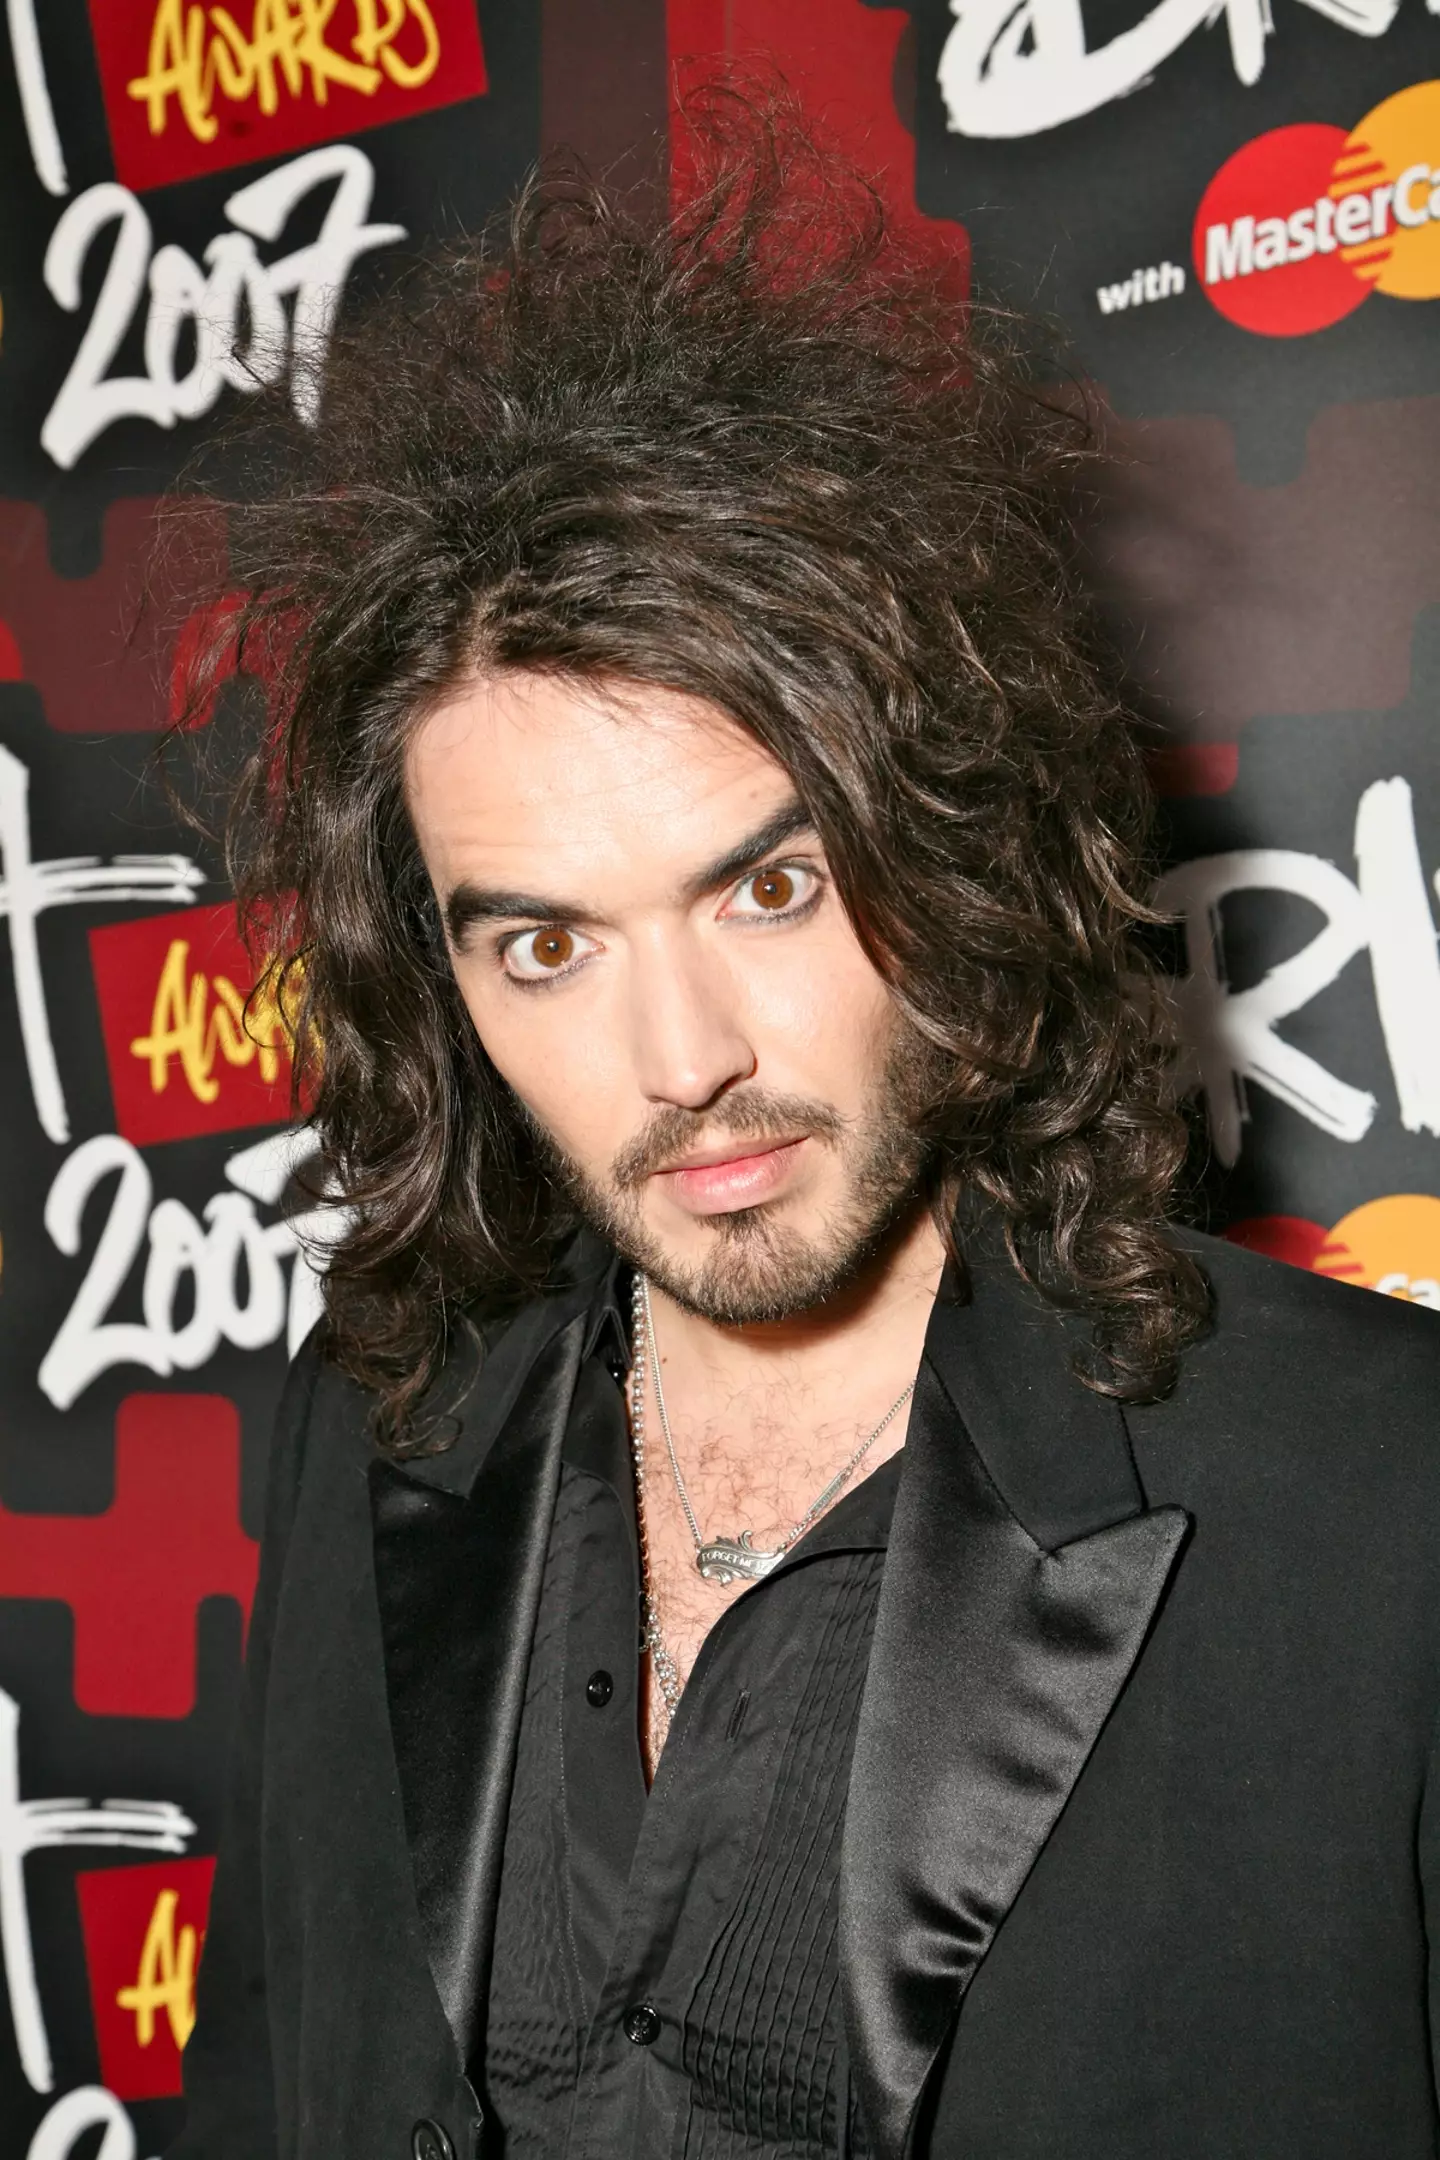 Russell Brand is facing accusations of rape and sexual assault from multiple women.